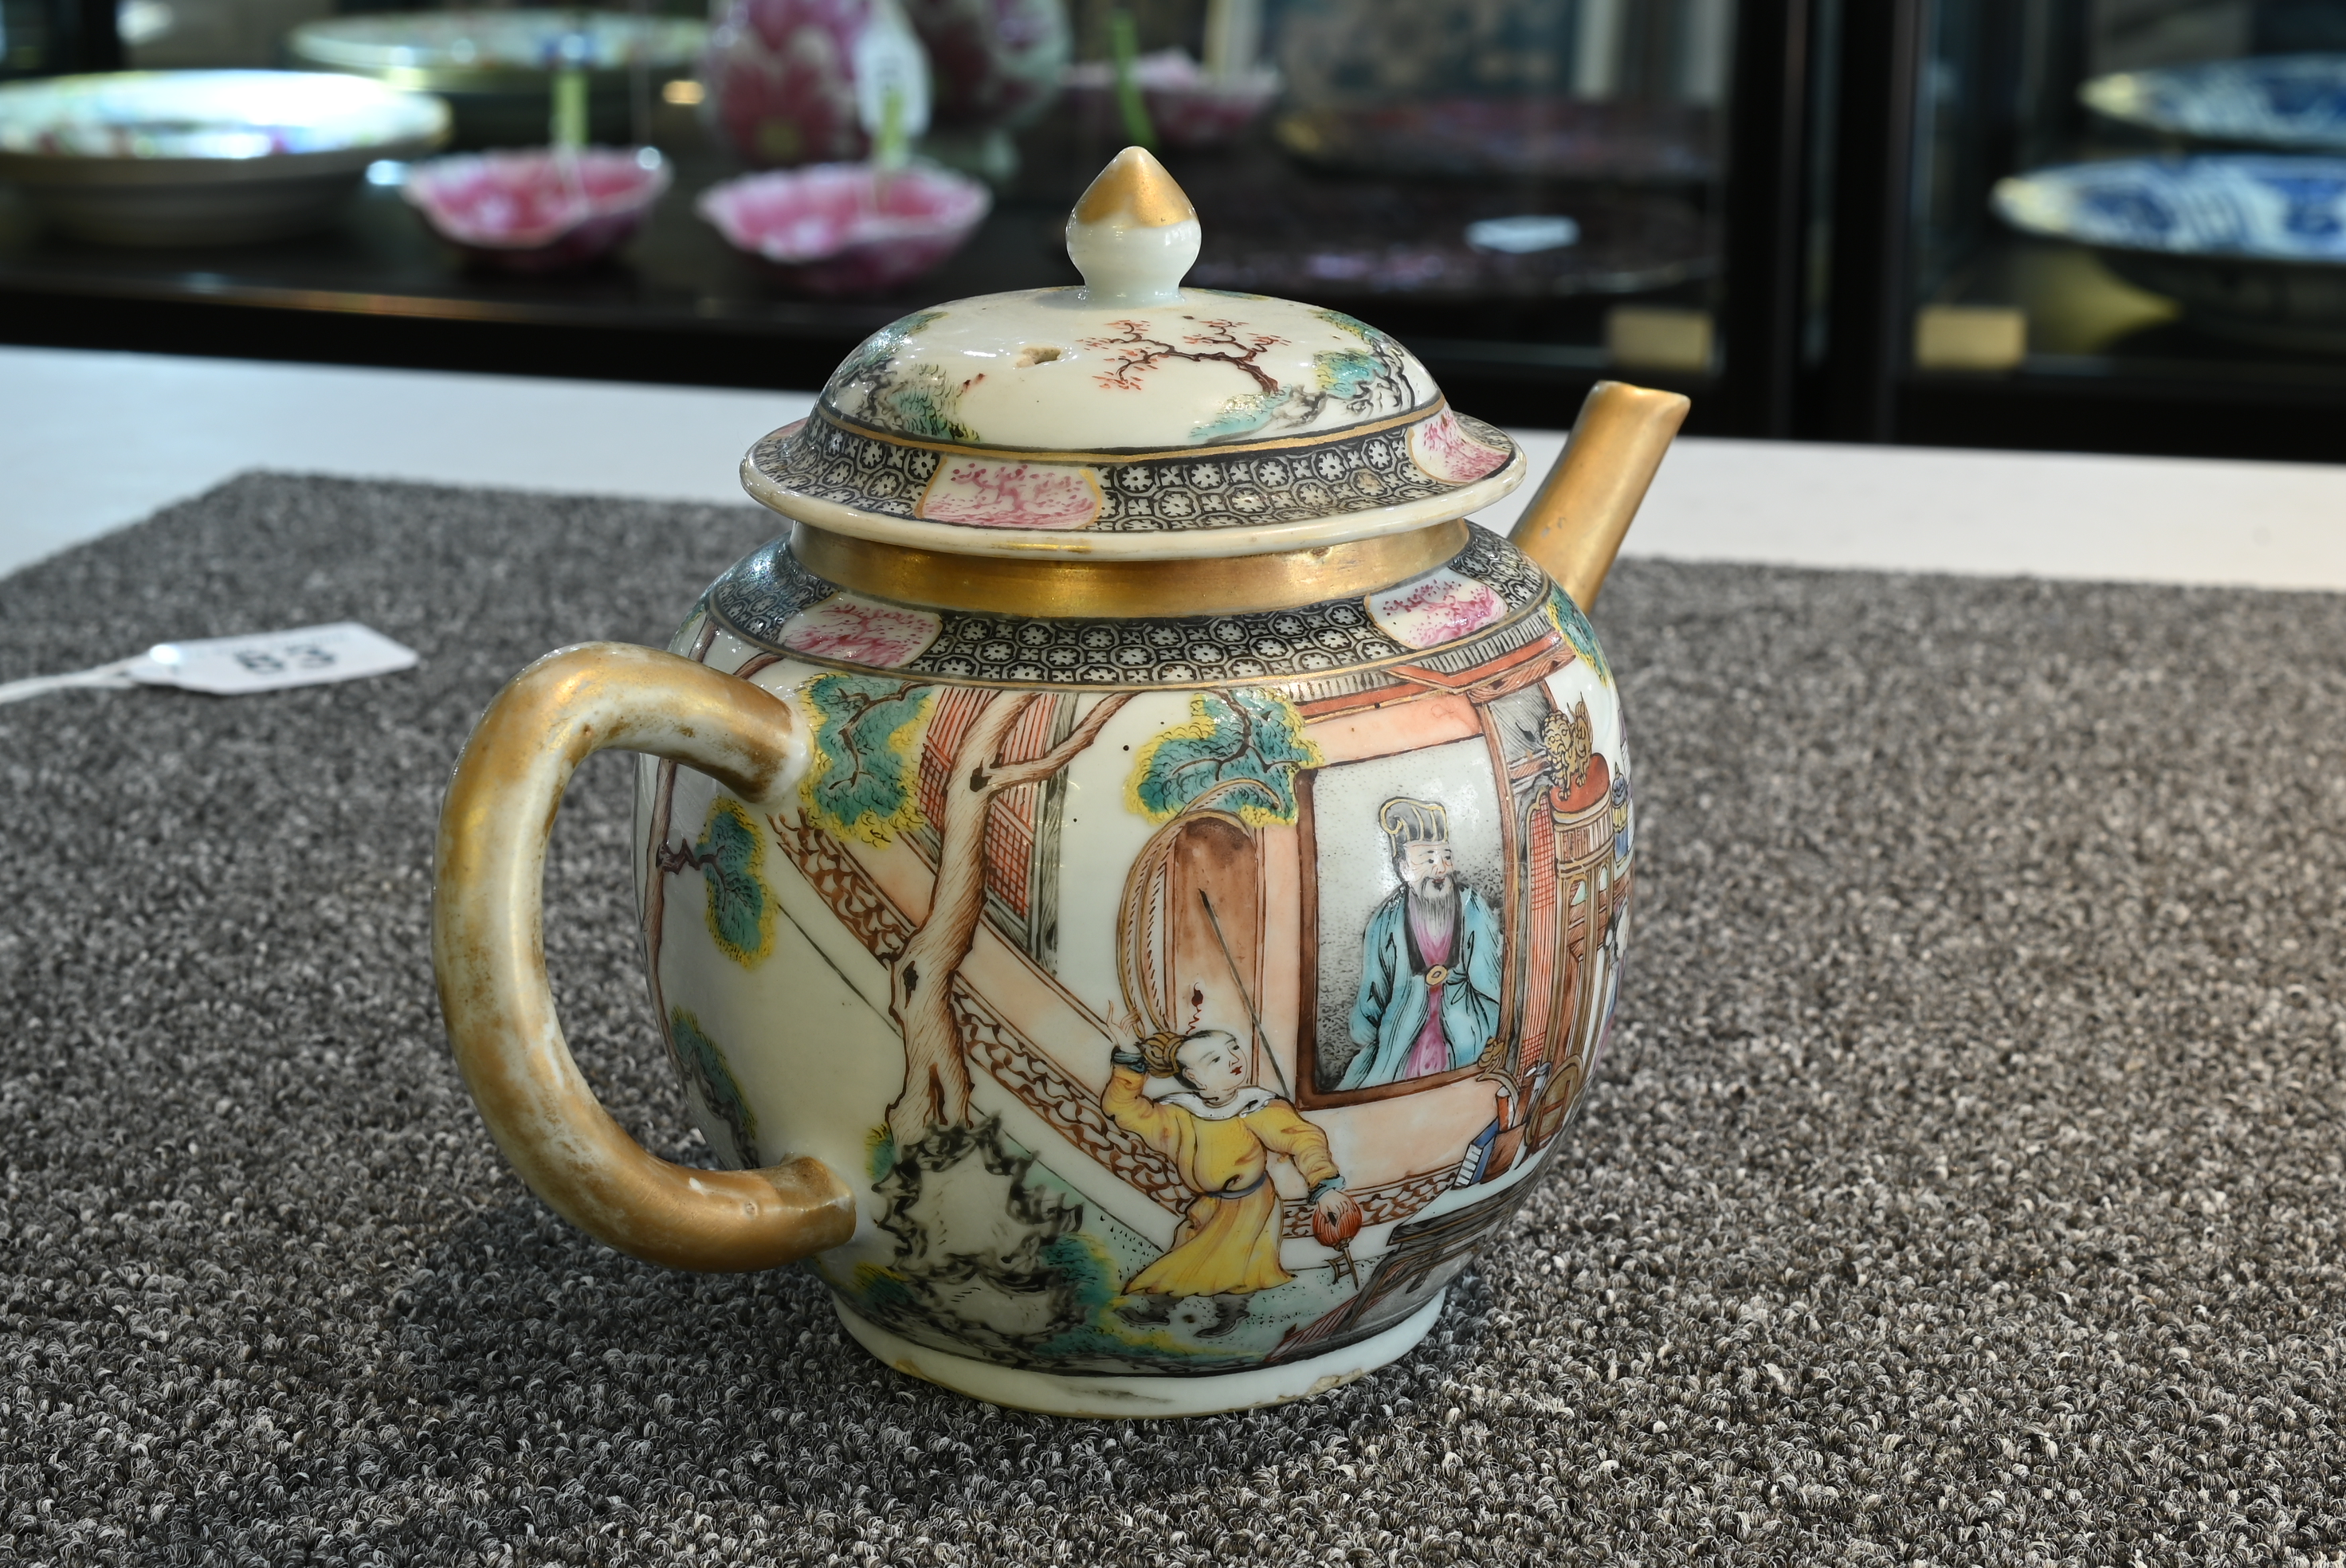 A FINE CHINESE FAMILLE ROSE PORCELAIN TEAPOT, 18TH CENTURY - Image 10 of 21